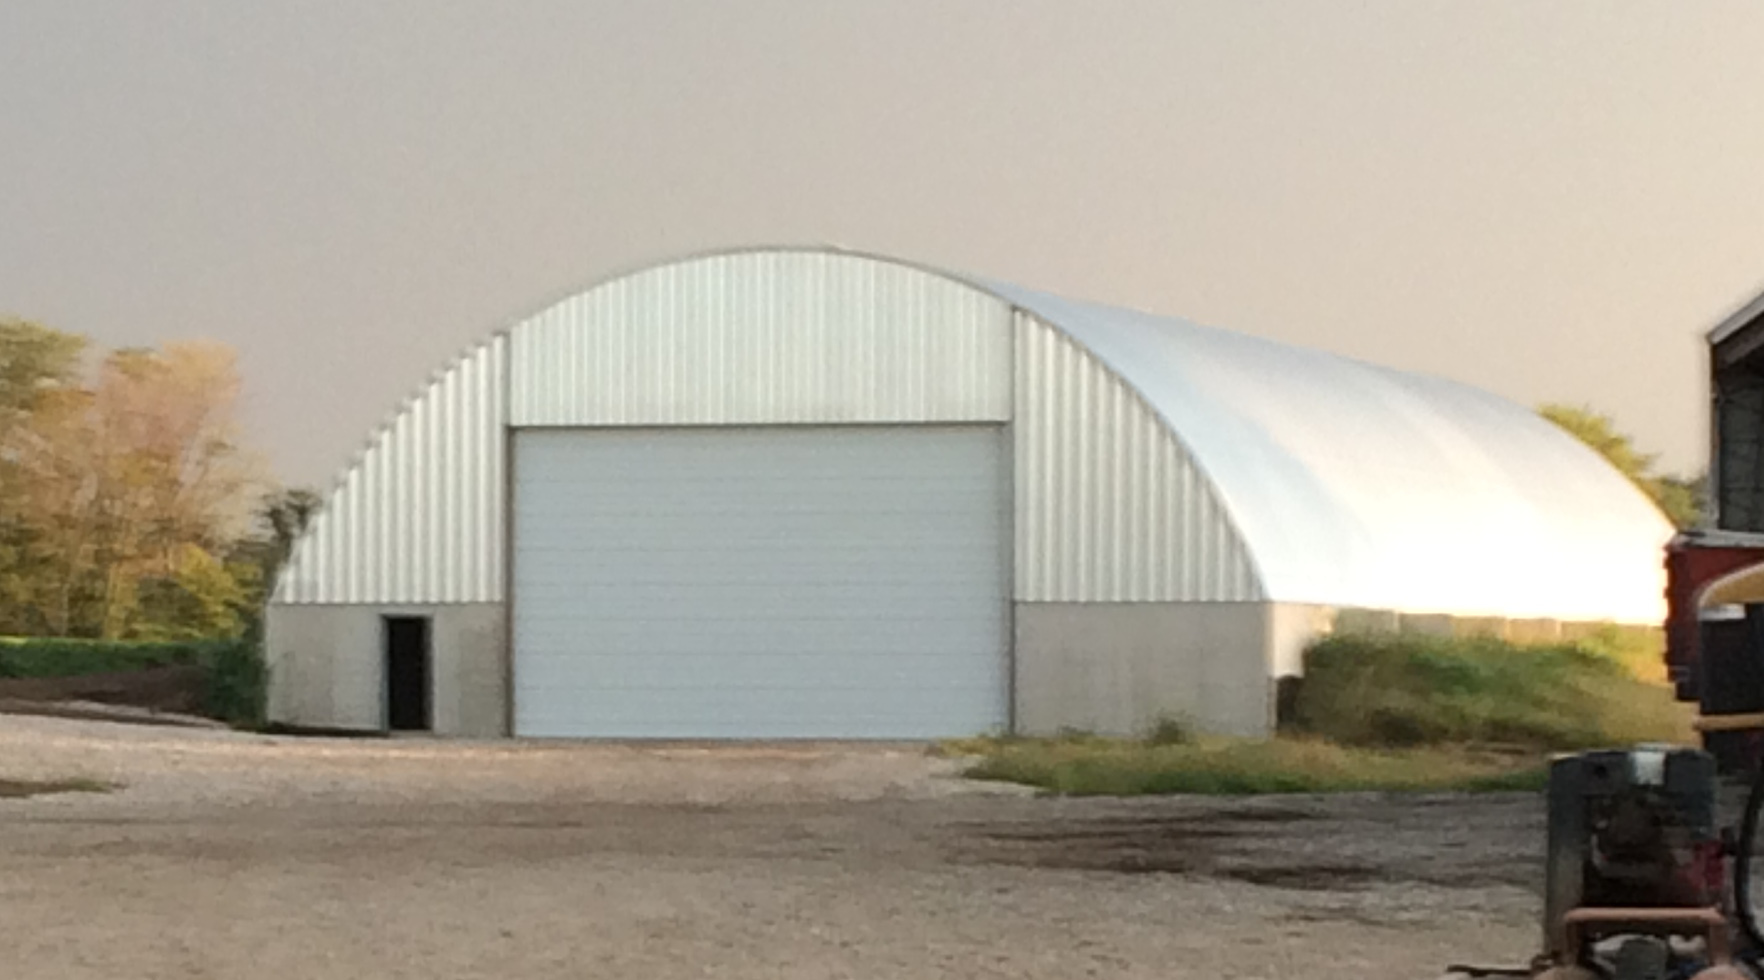 Quonset hut steel building on wall